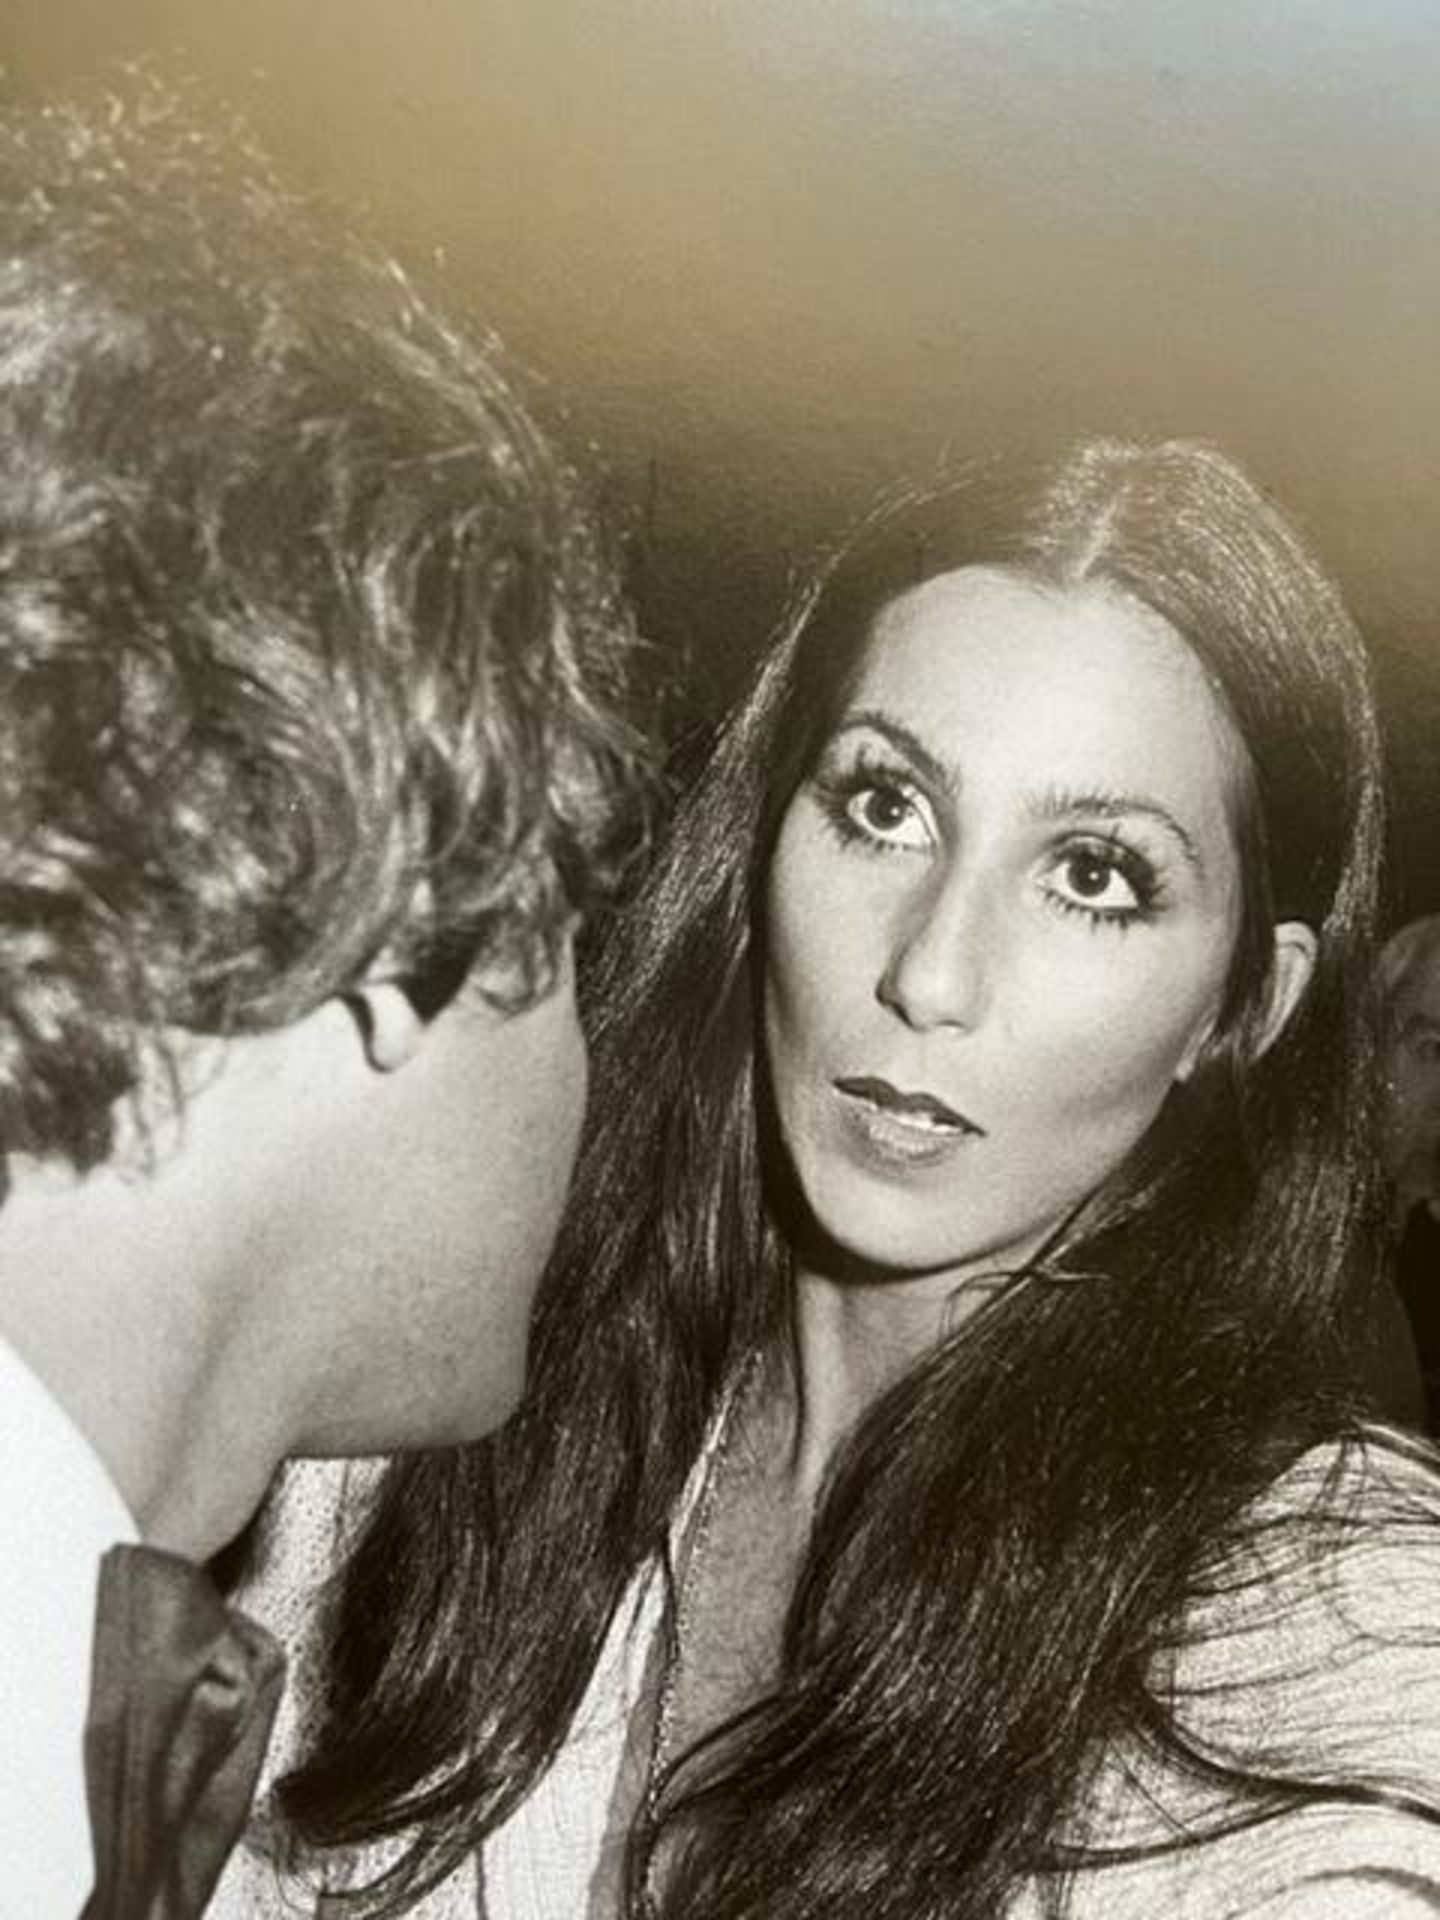 Ian Schrager "Cher with Steve" Print.